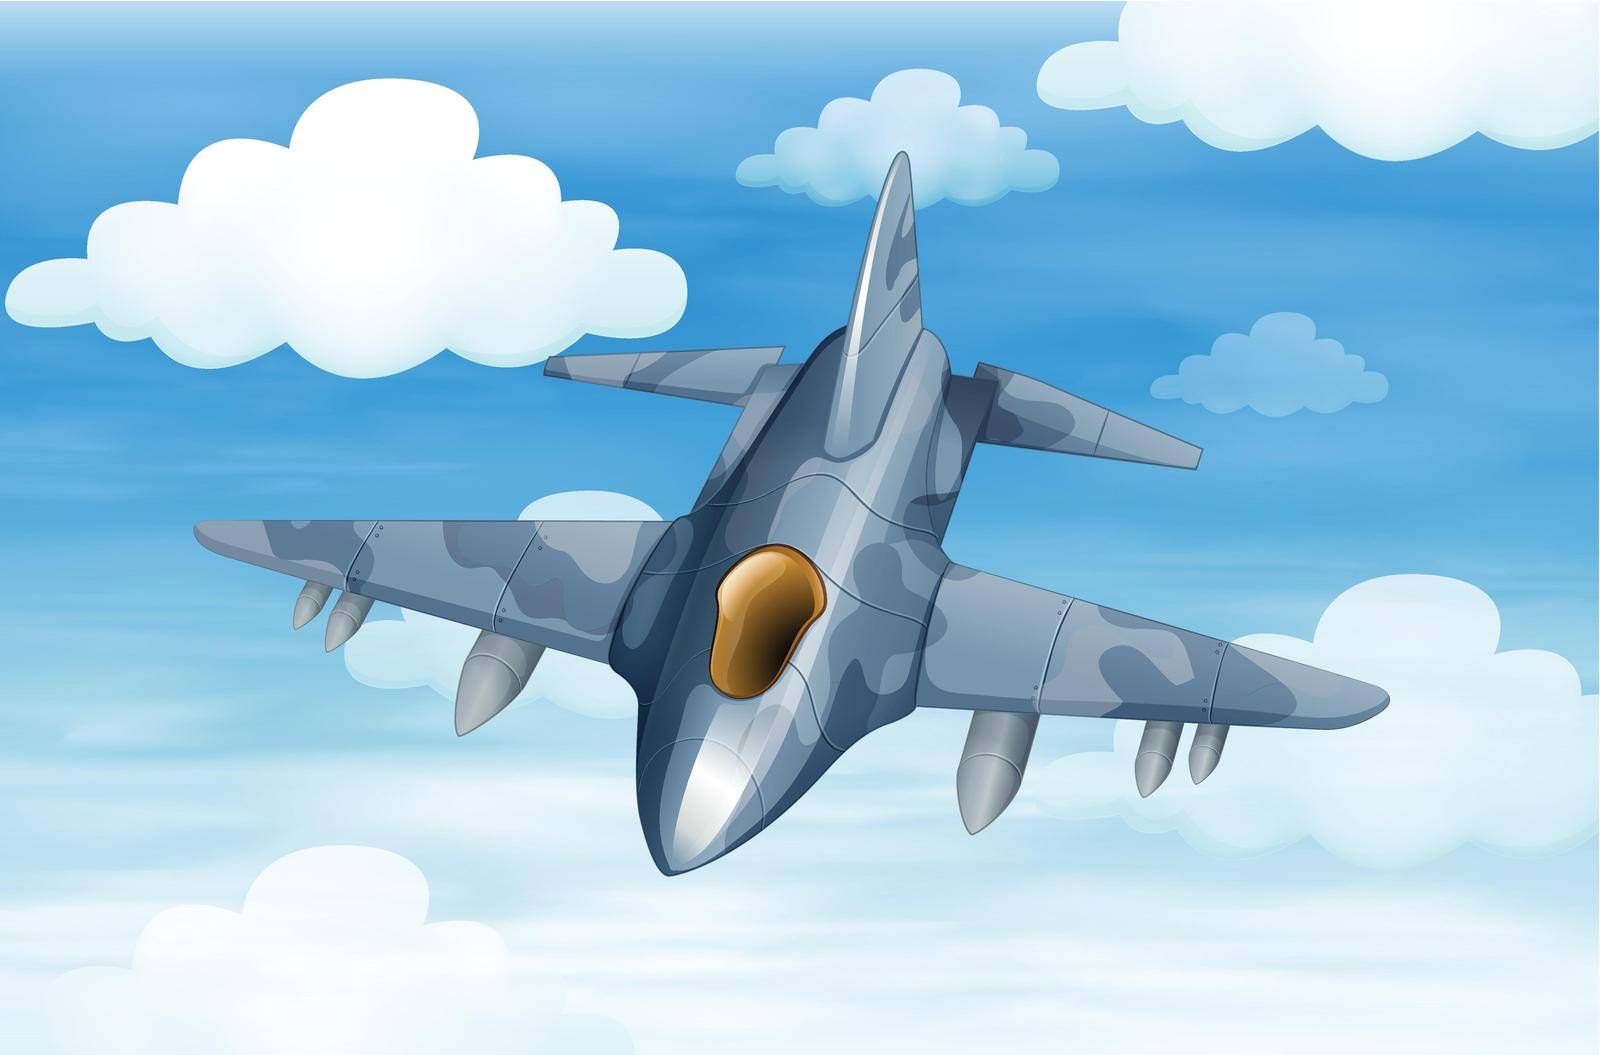 Illustration of a military aircraft in the sky